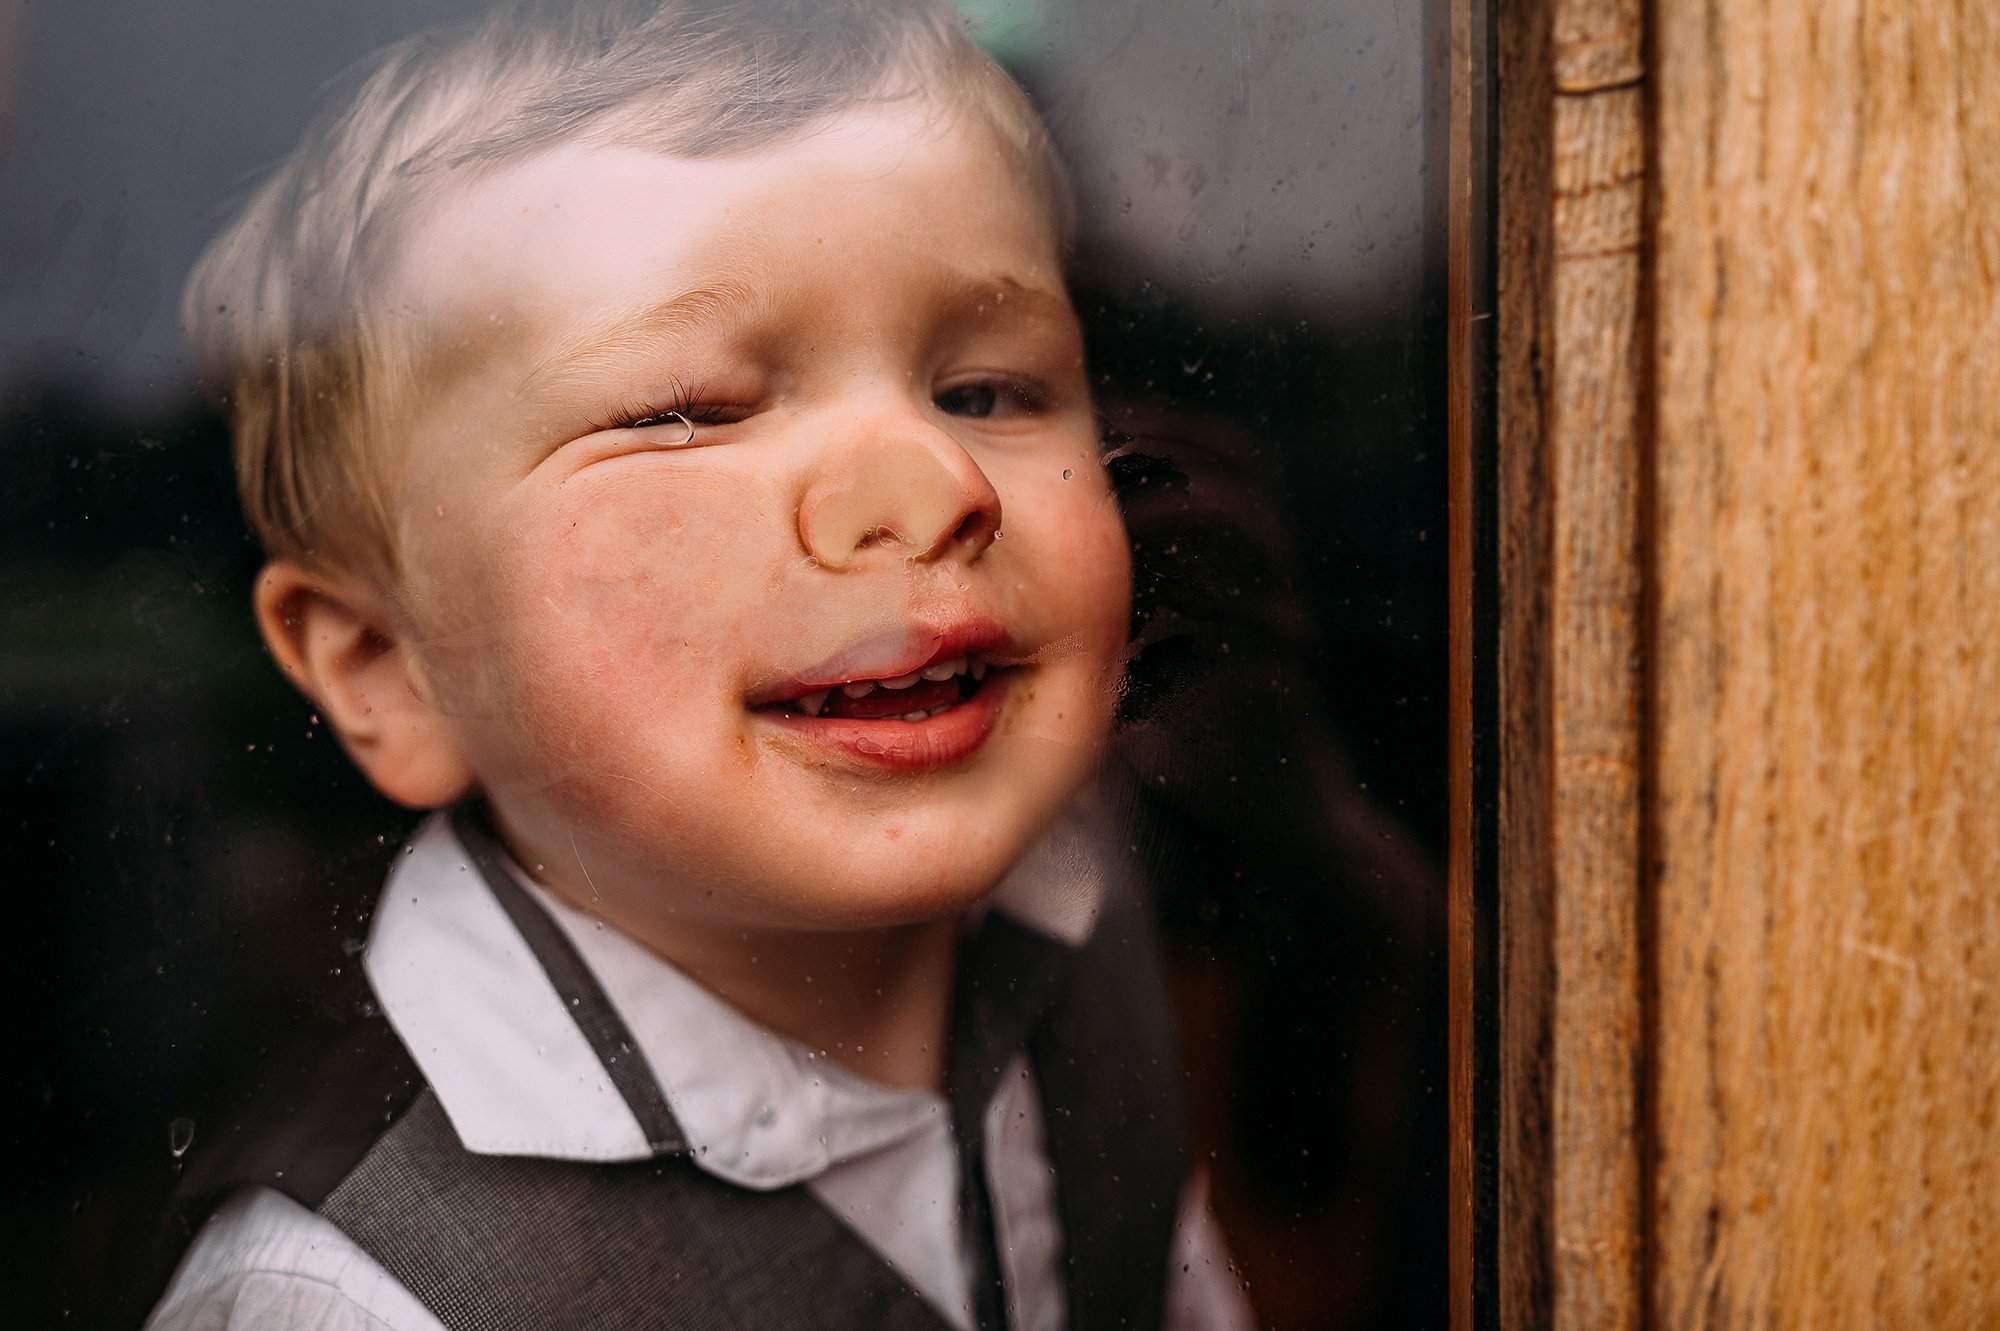  child squashing his face up against the window. 